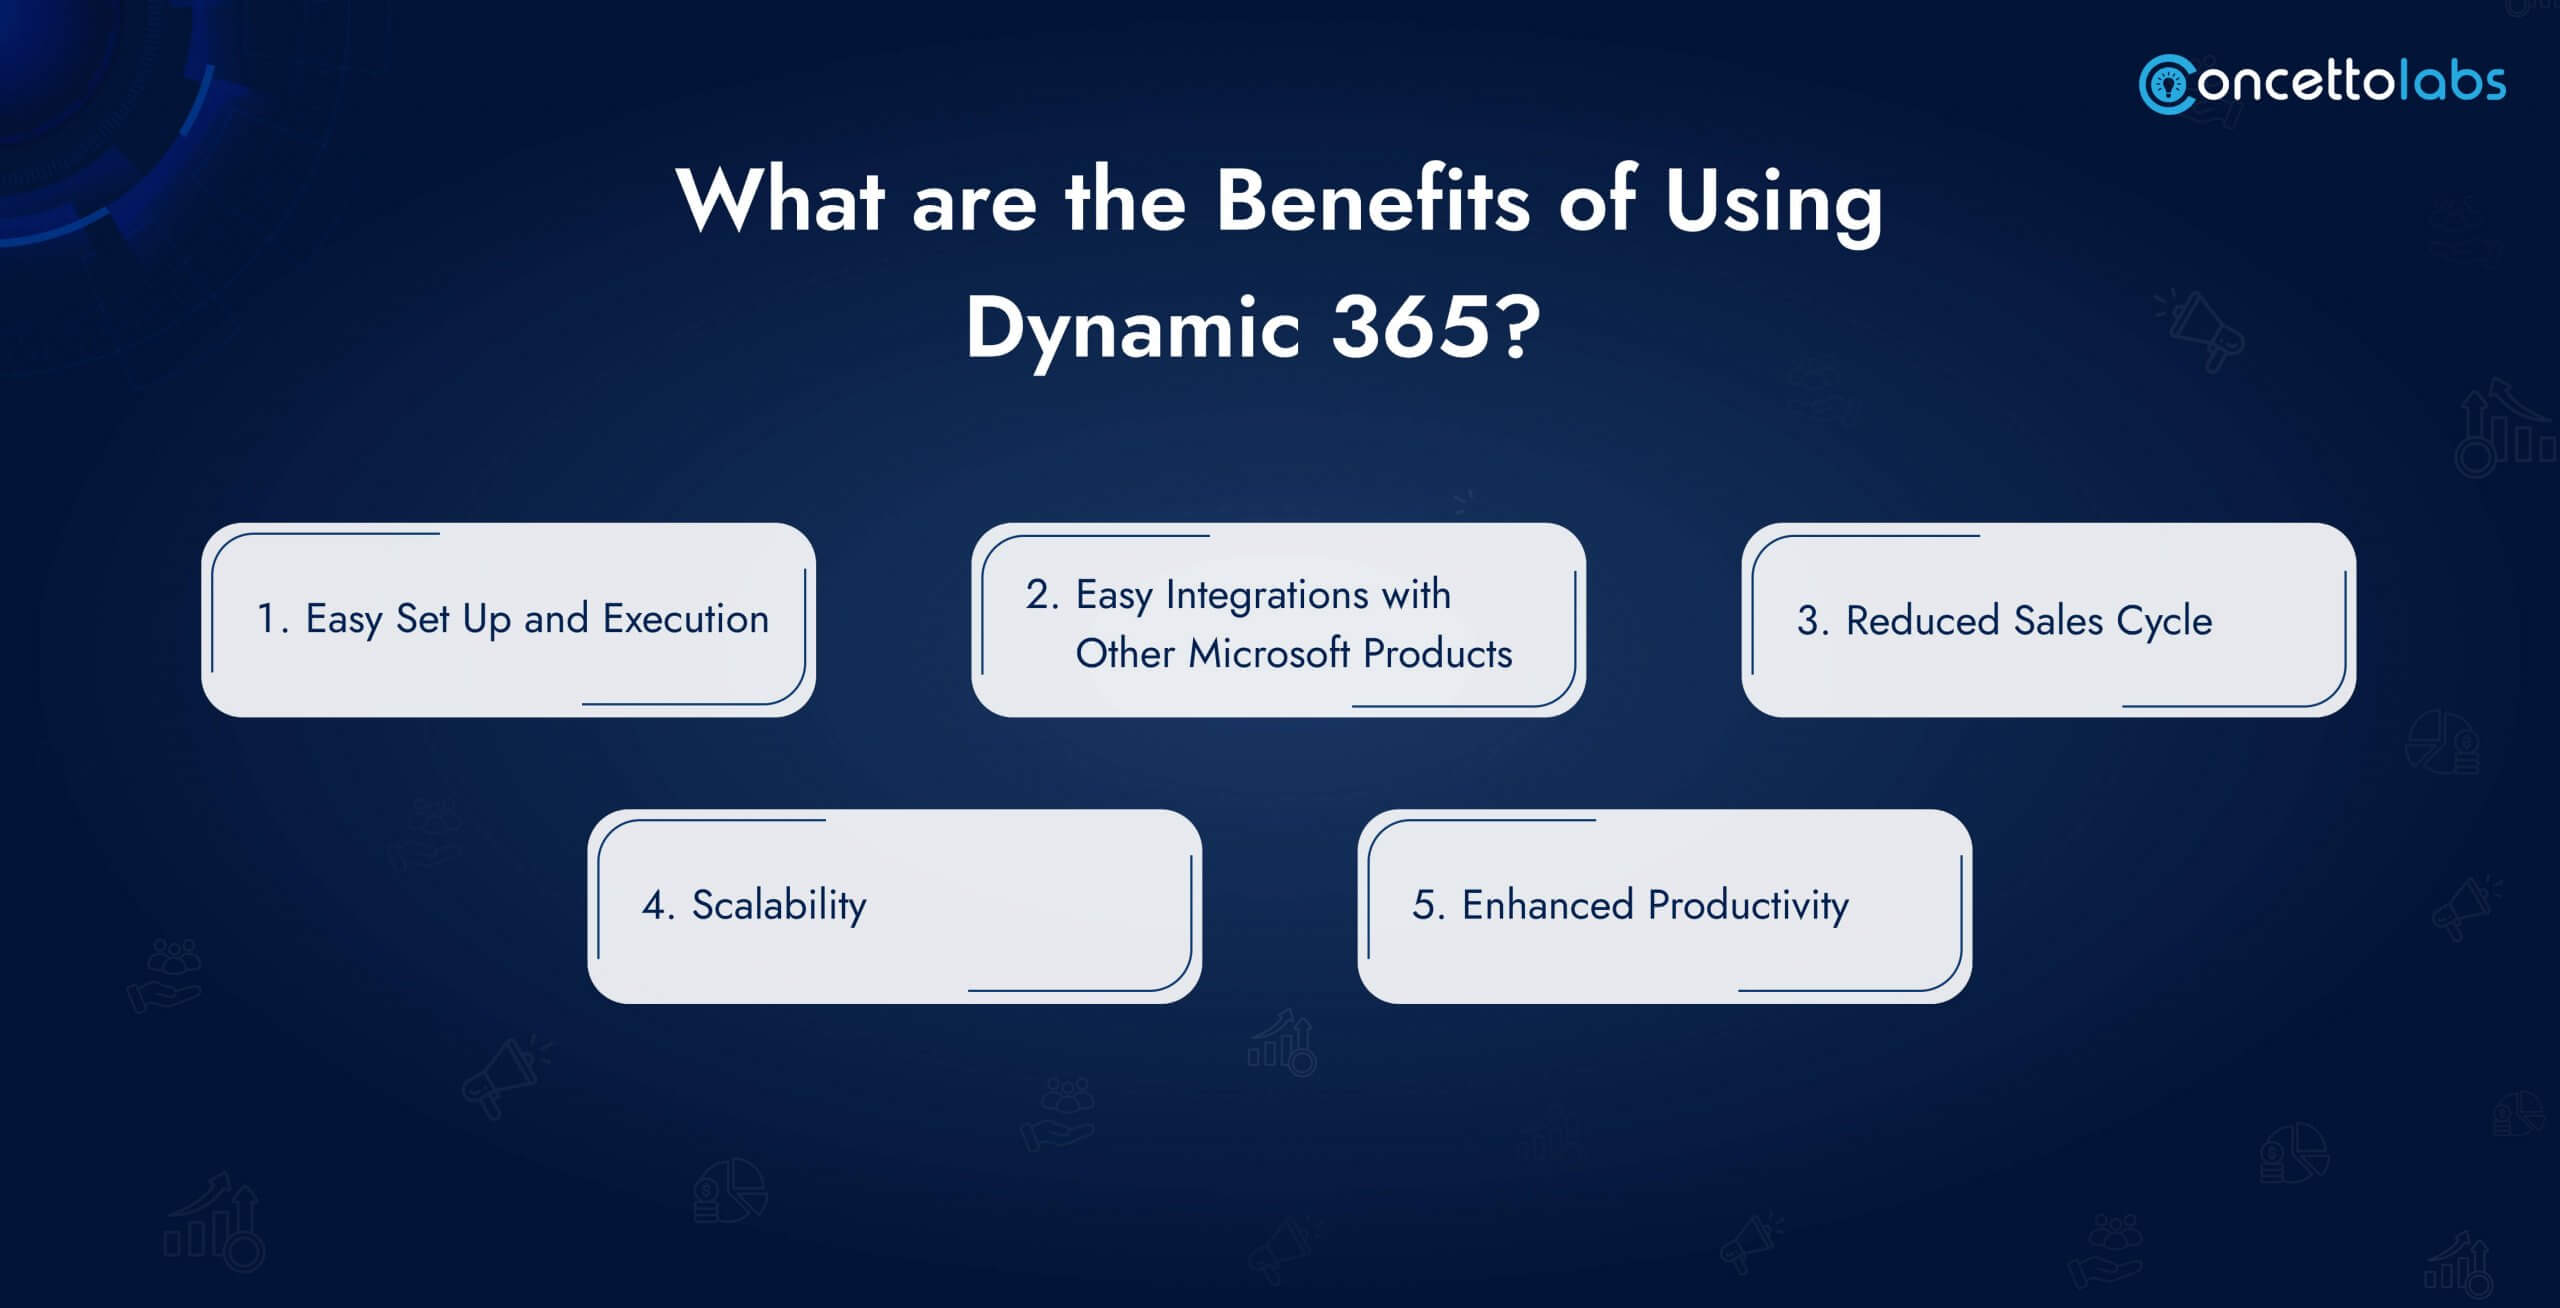 What are the Benefits of Using Dynamic 365?